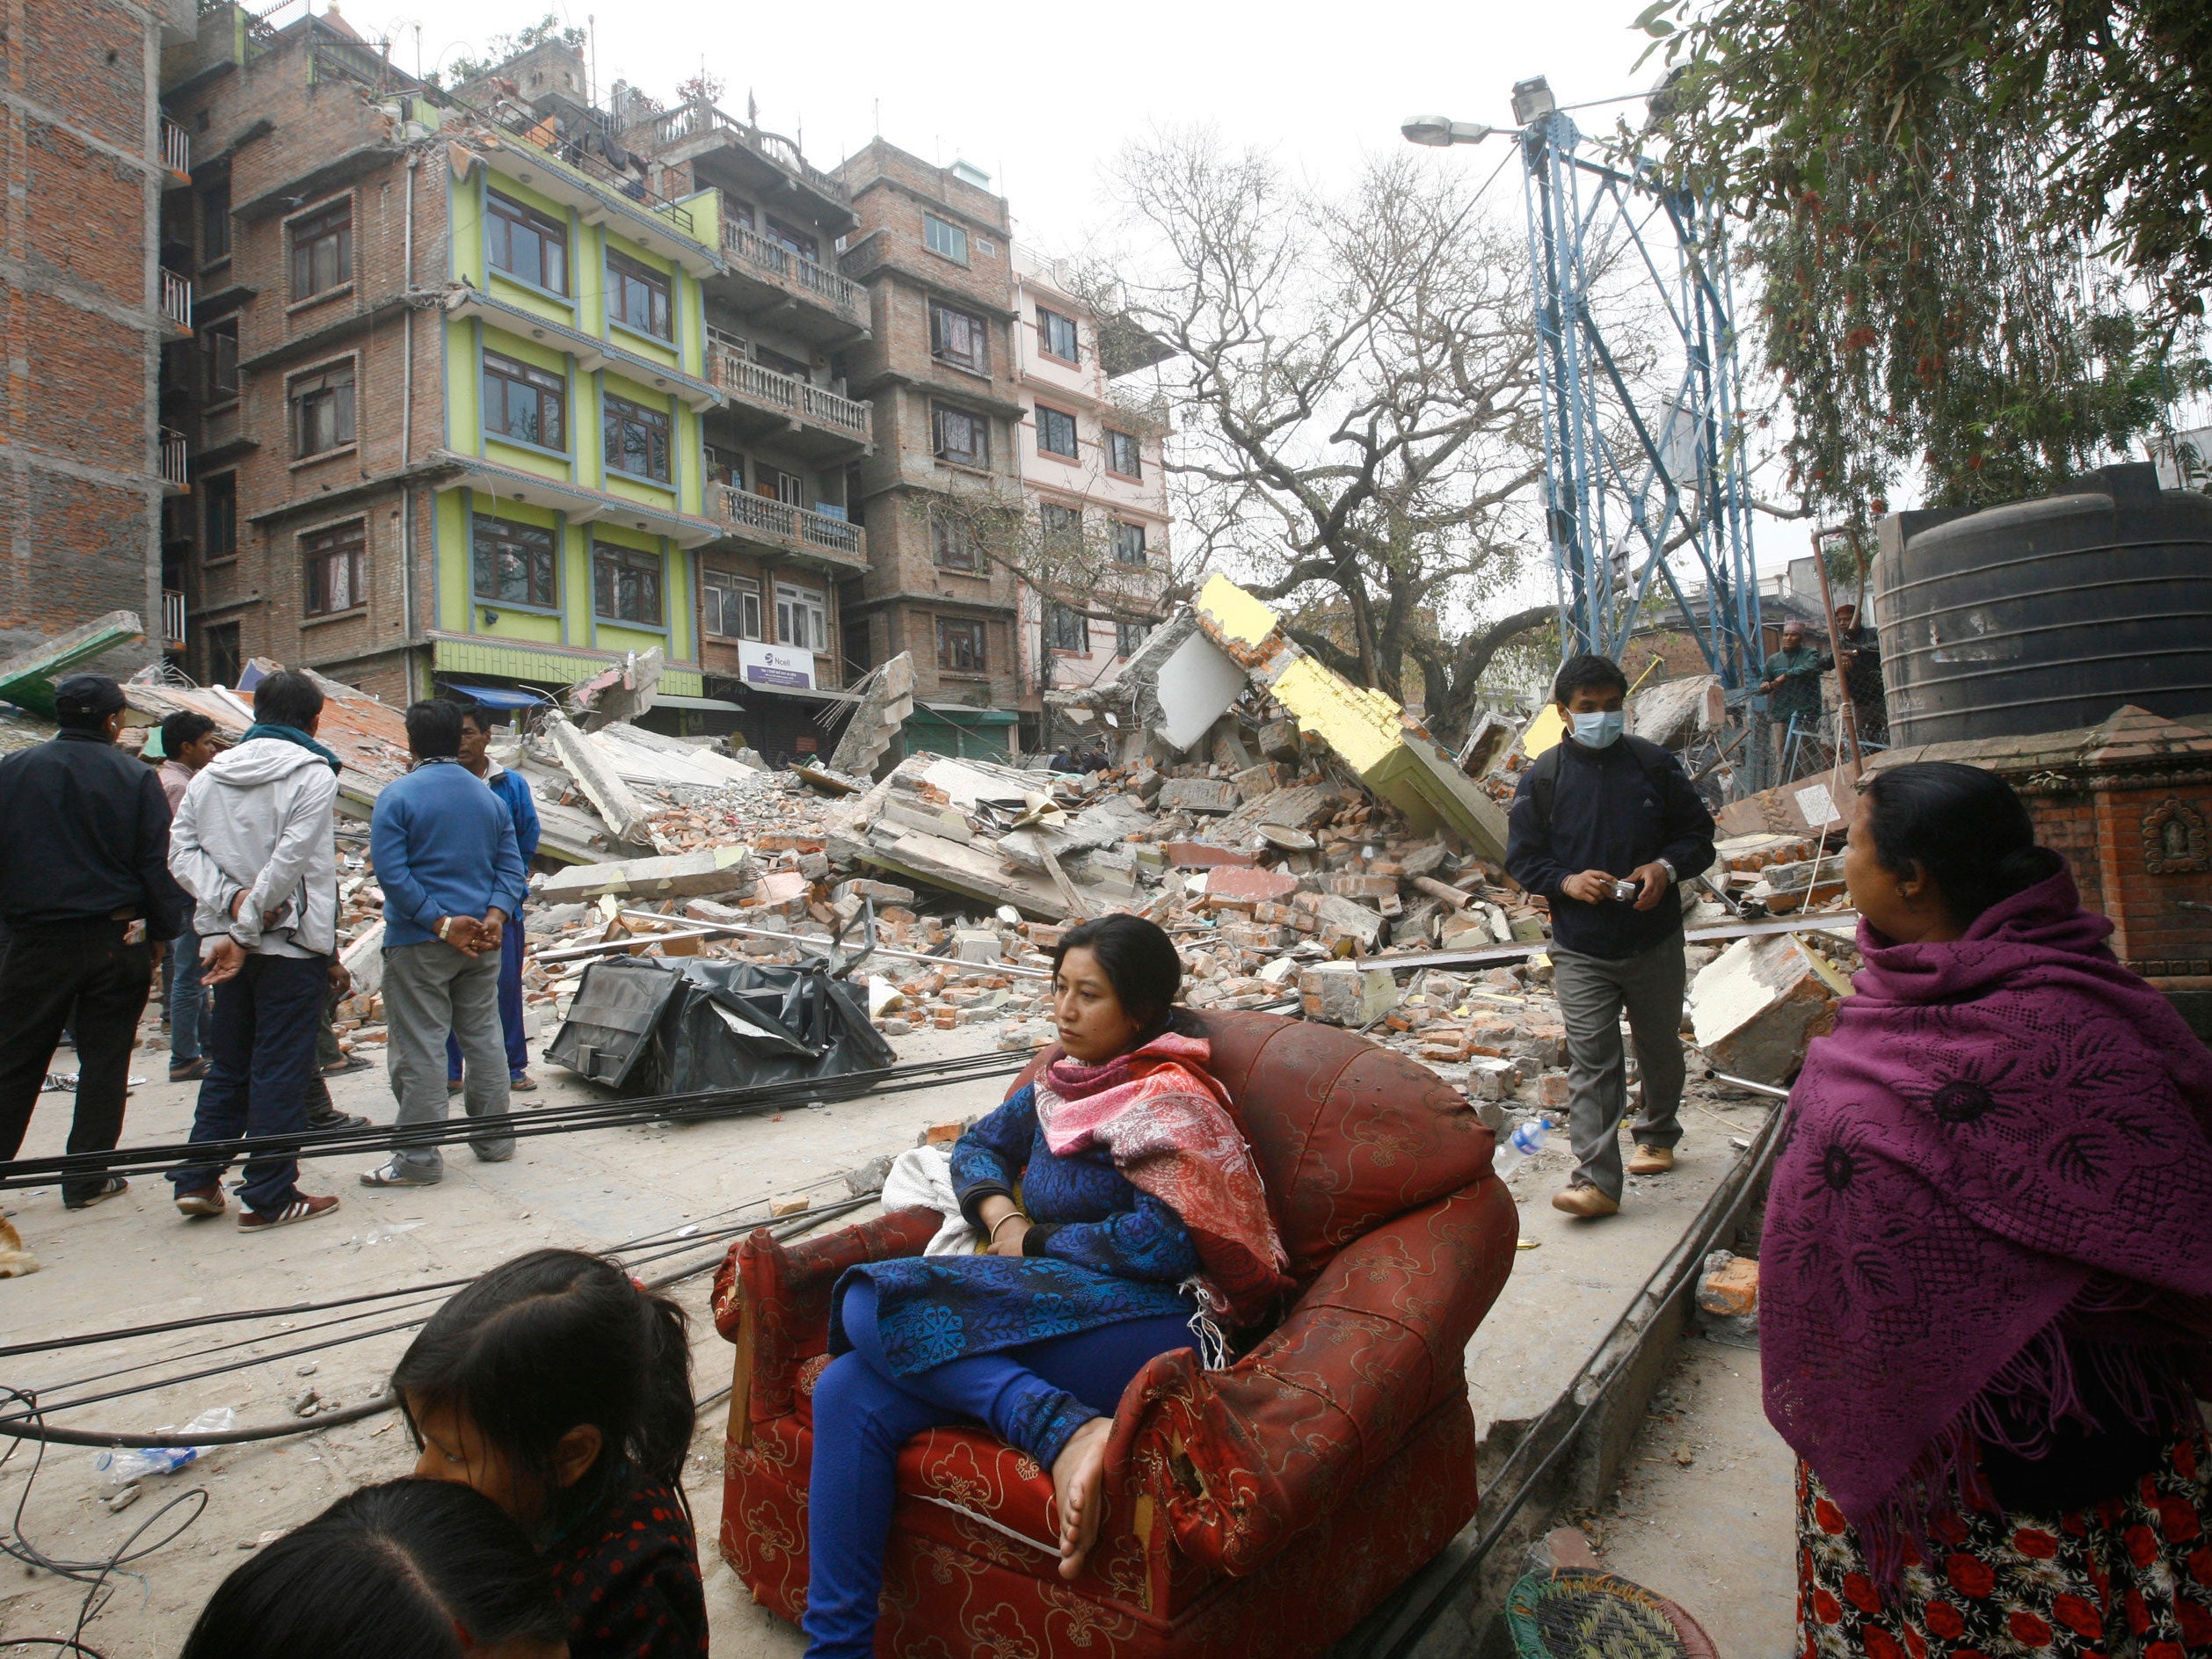 A Nepalese woman sits on a sofa outdoors surrounded by the debris of Saturday's earthquake